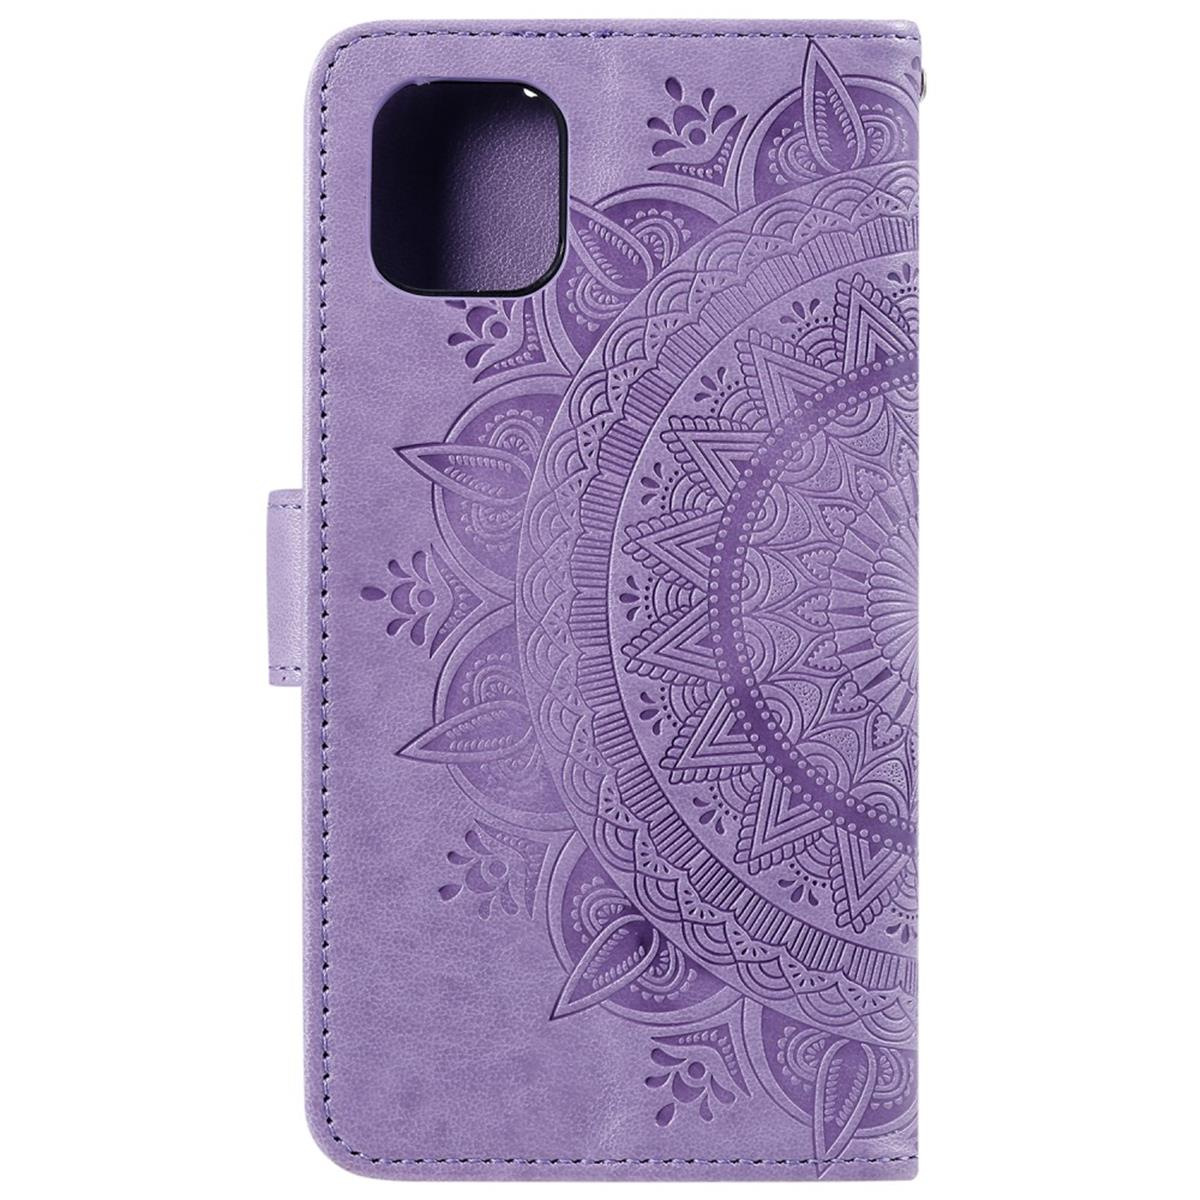 Muster, Mandala iPhone Bookcover, Lila Klapphülle Apple, 11, mit COVERKINGZ